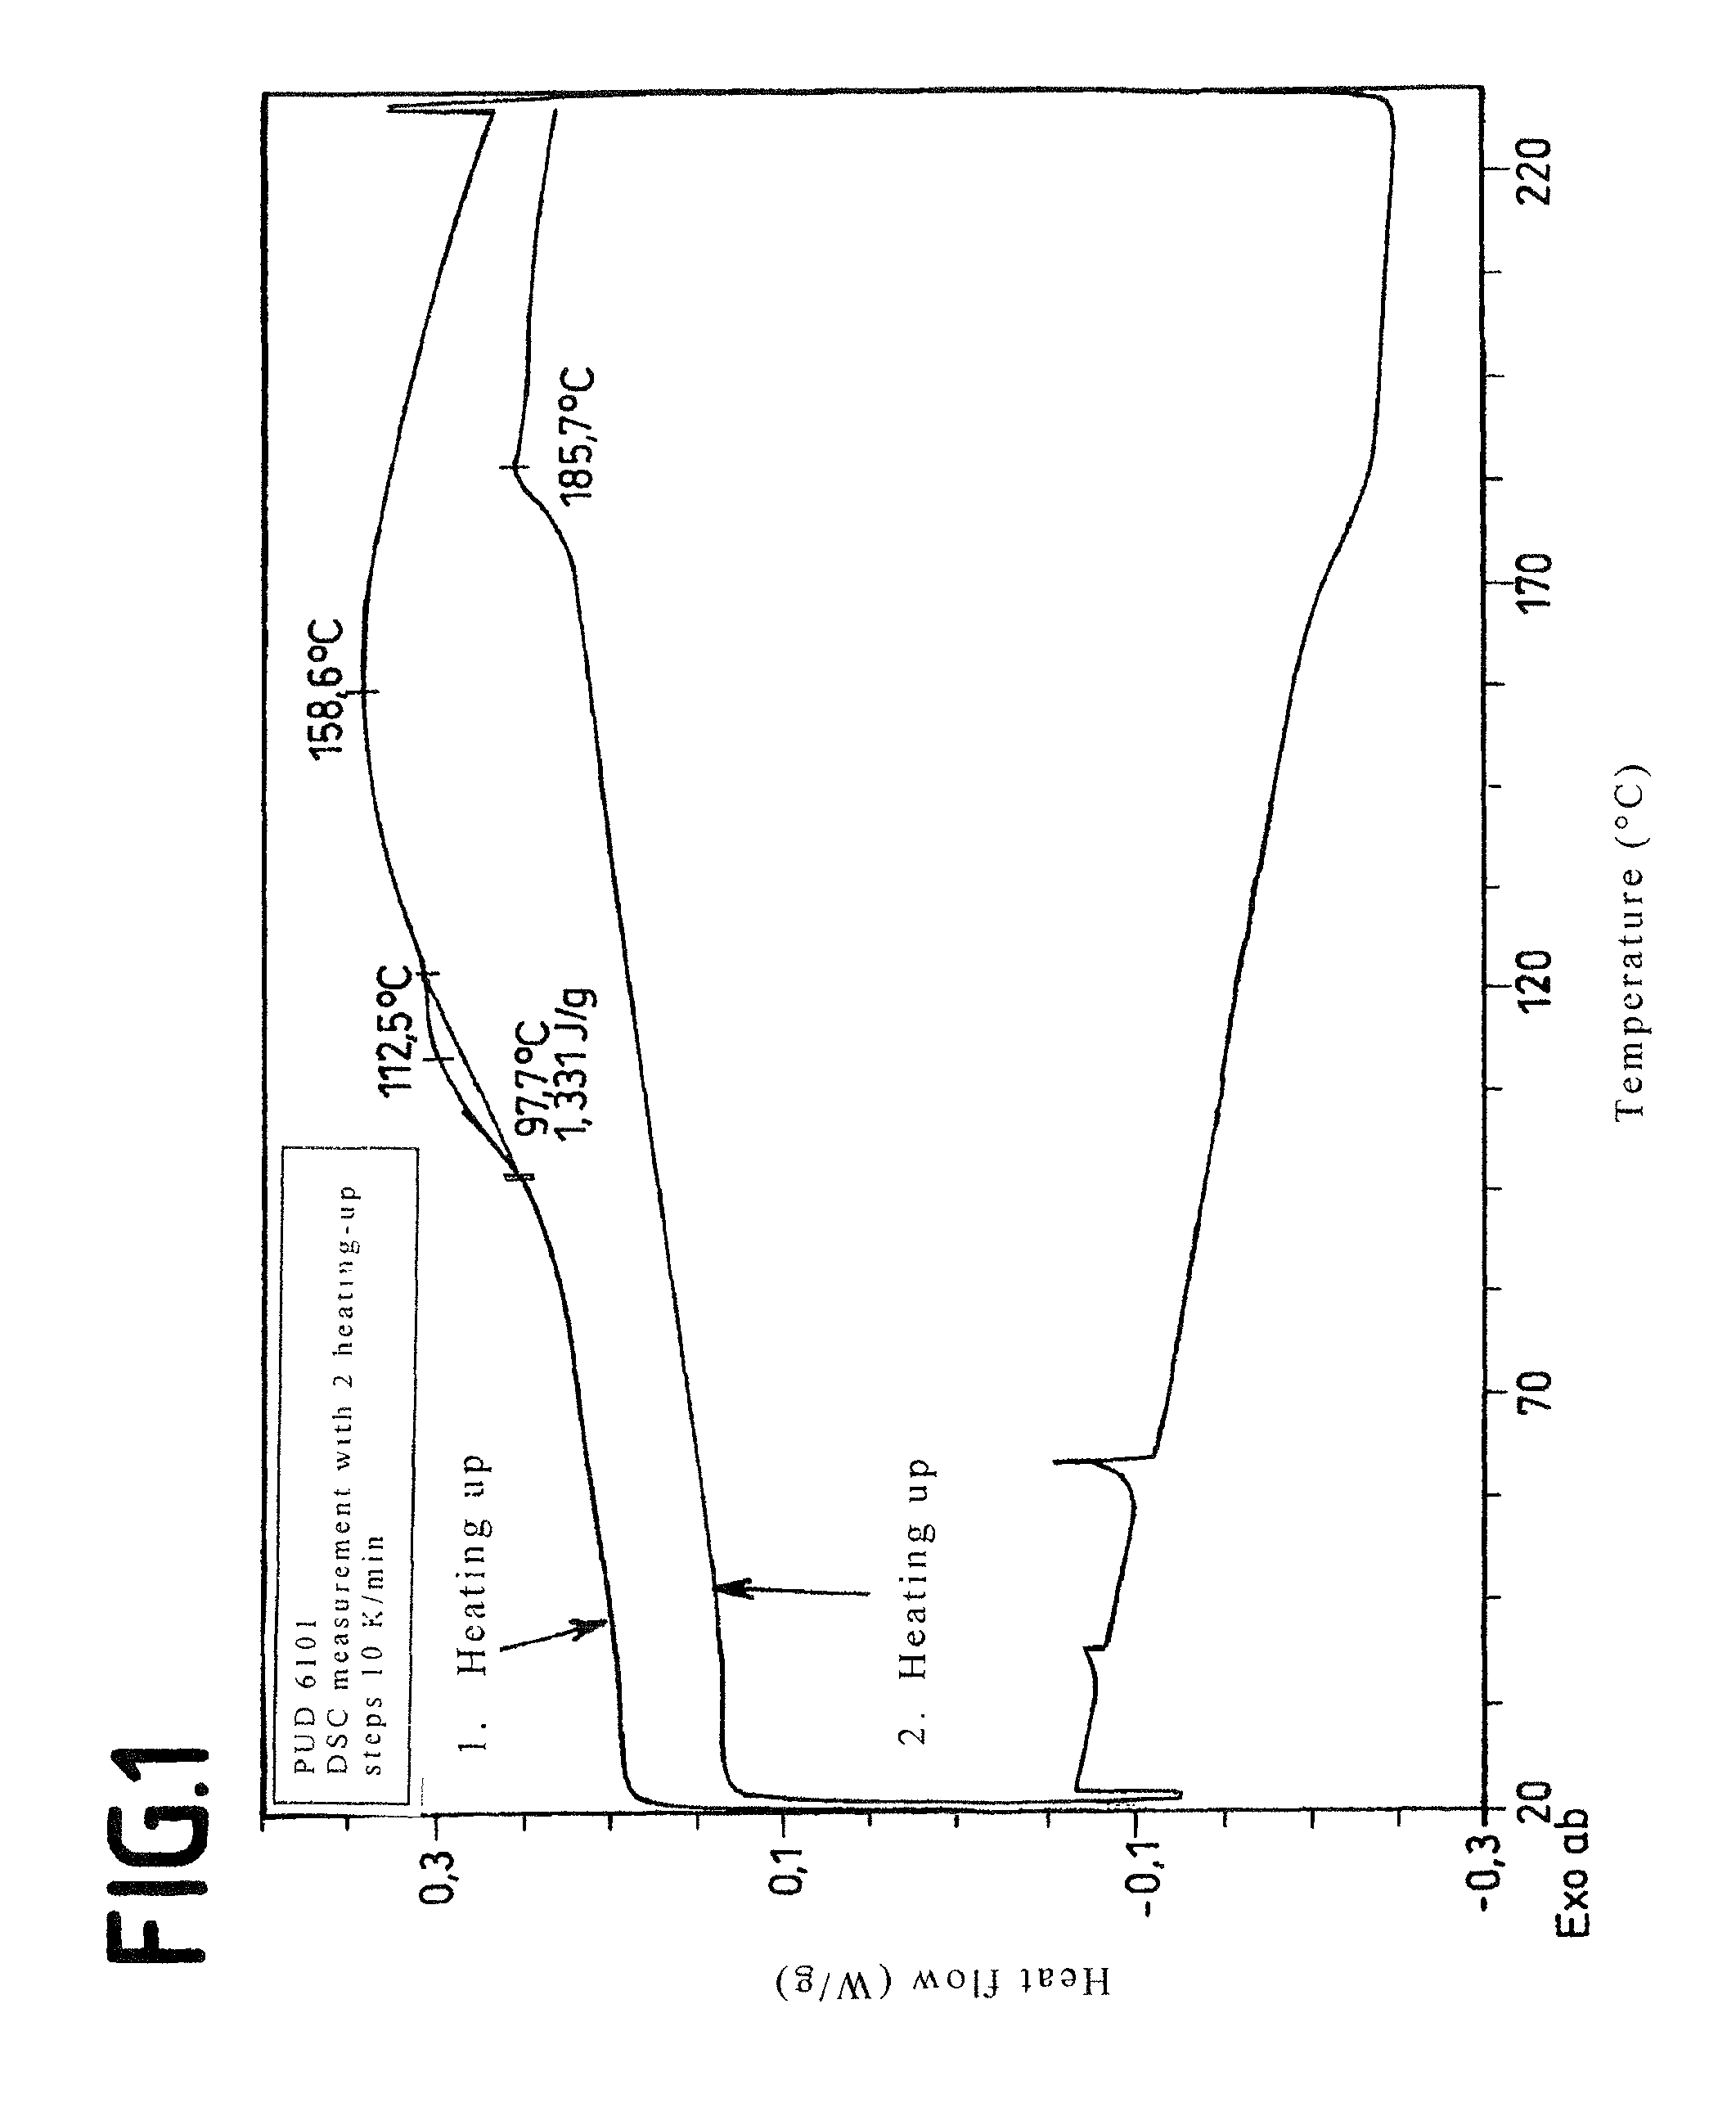 Method for producing a polycarbonate layered composite